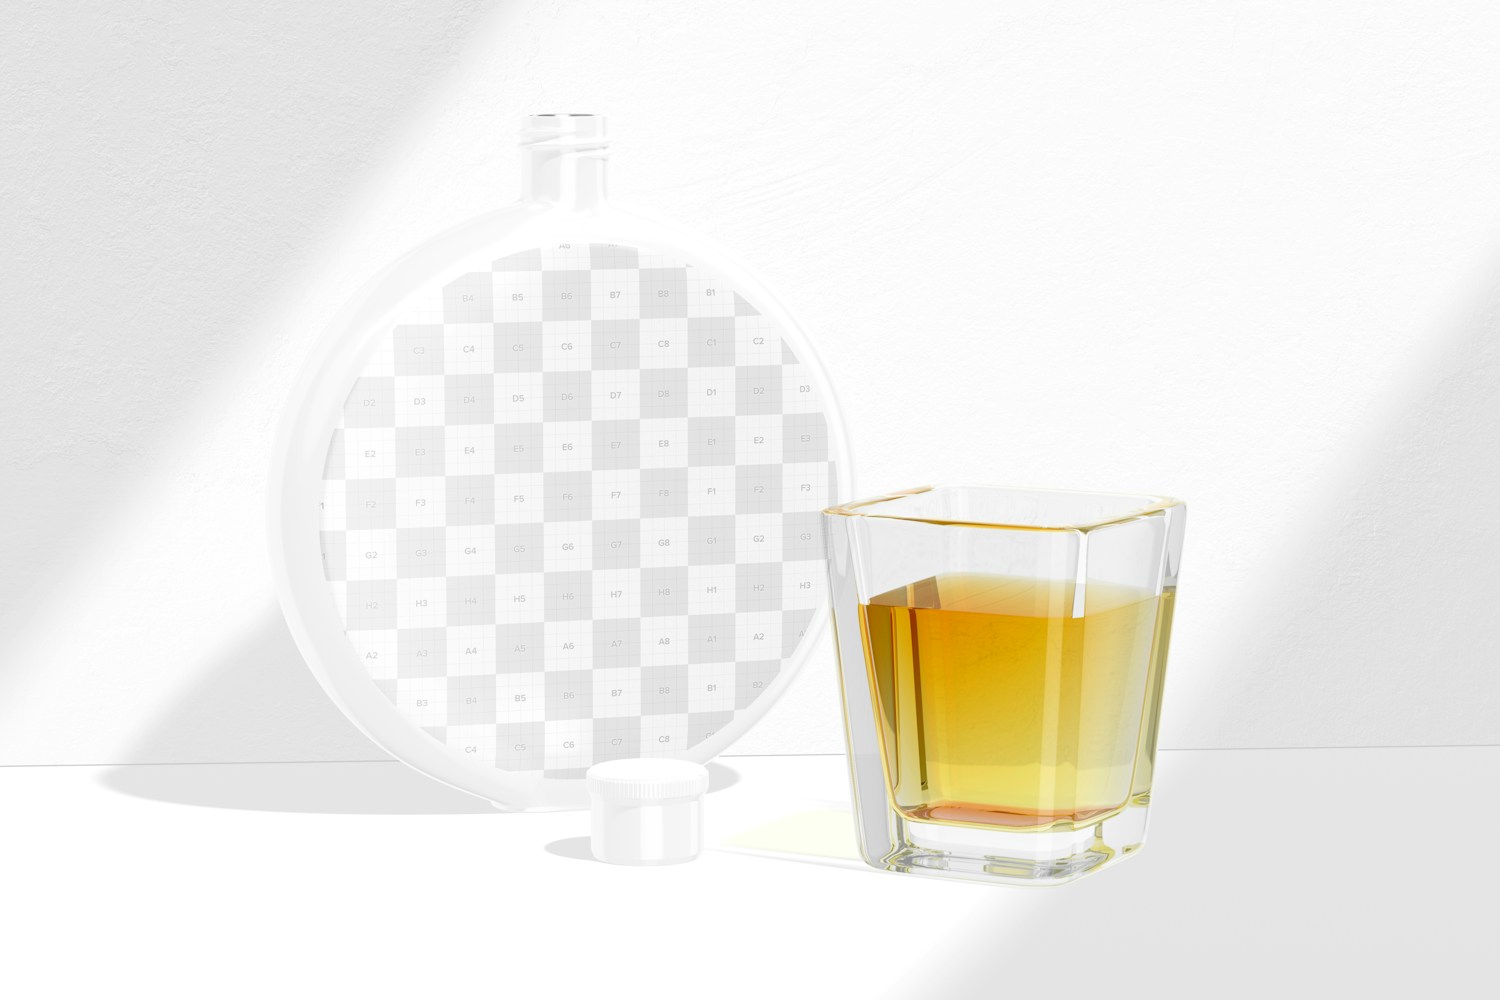 Round Liquor Flask with Whiskey Glass Mockup